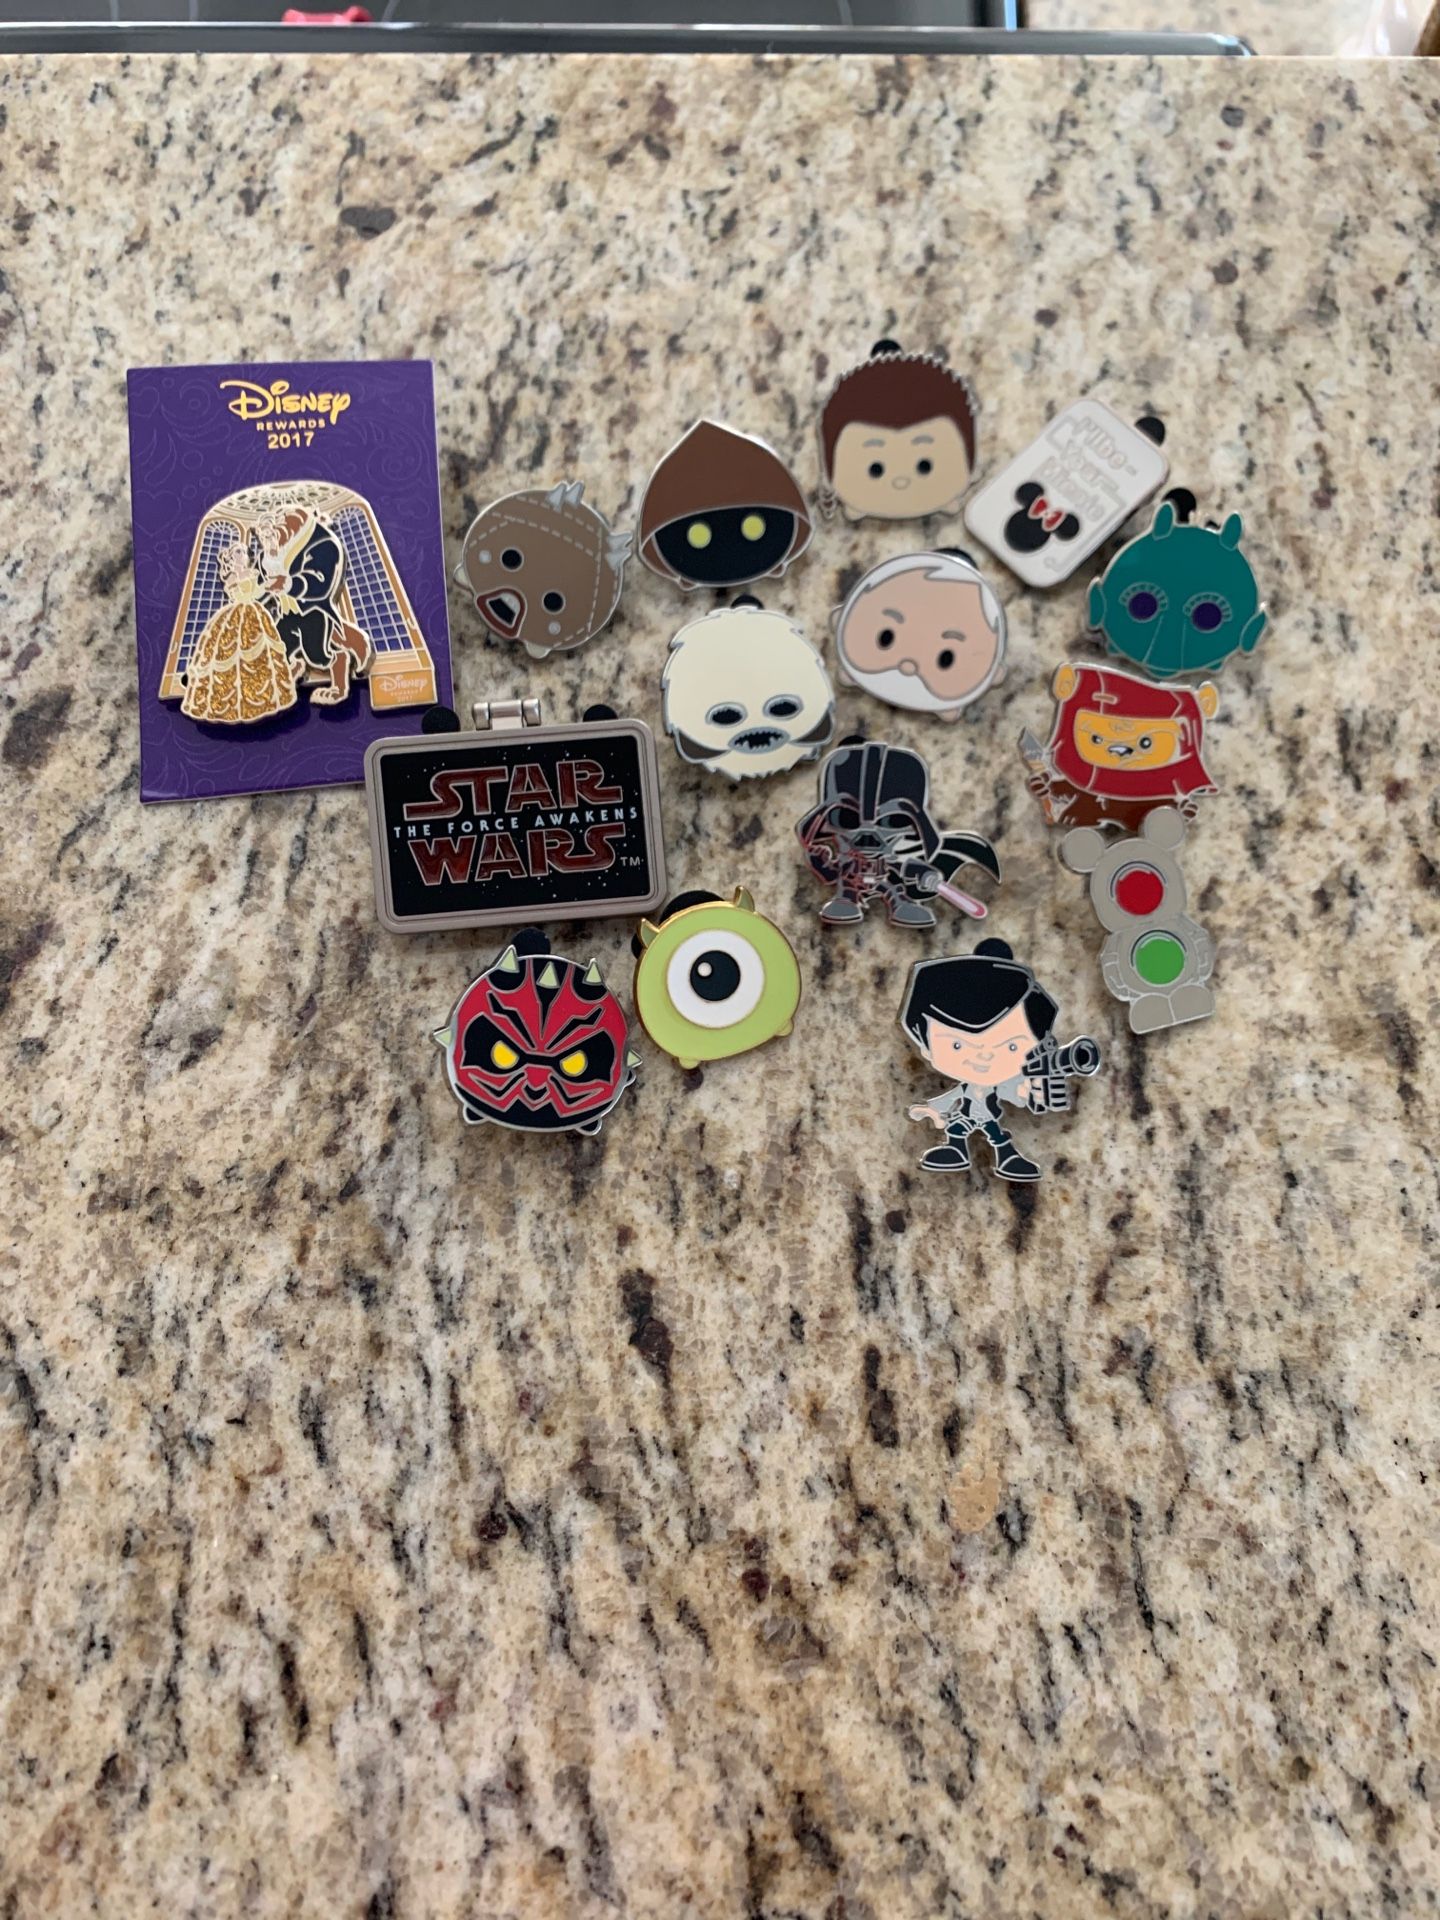 Disney Pins - Variety. All purchased from Disneyland